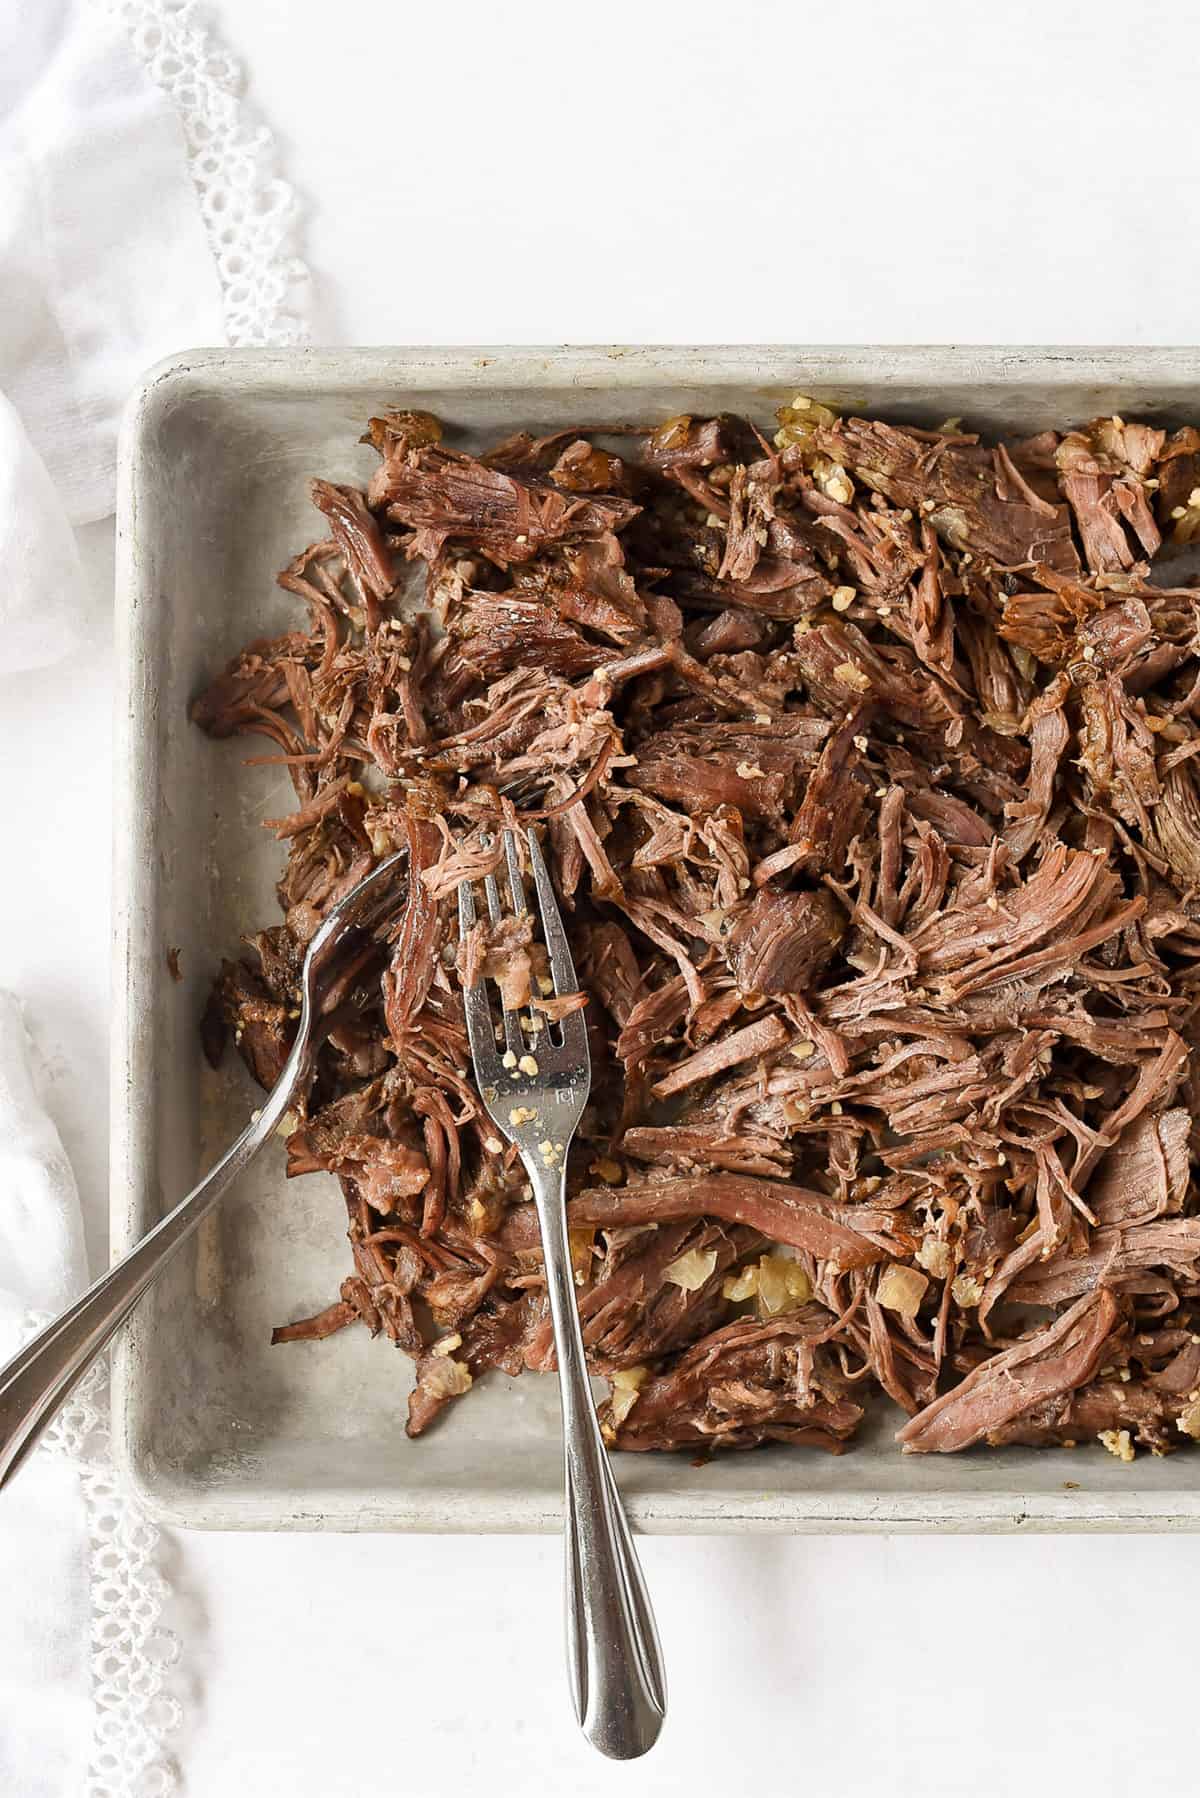 shredded meat on cookie sheet